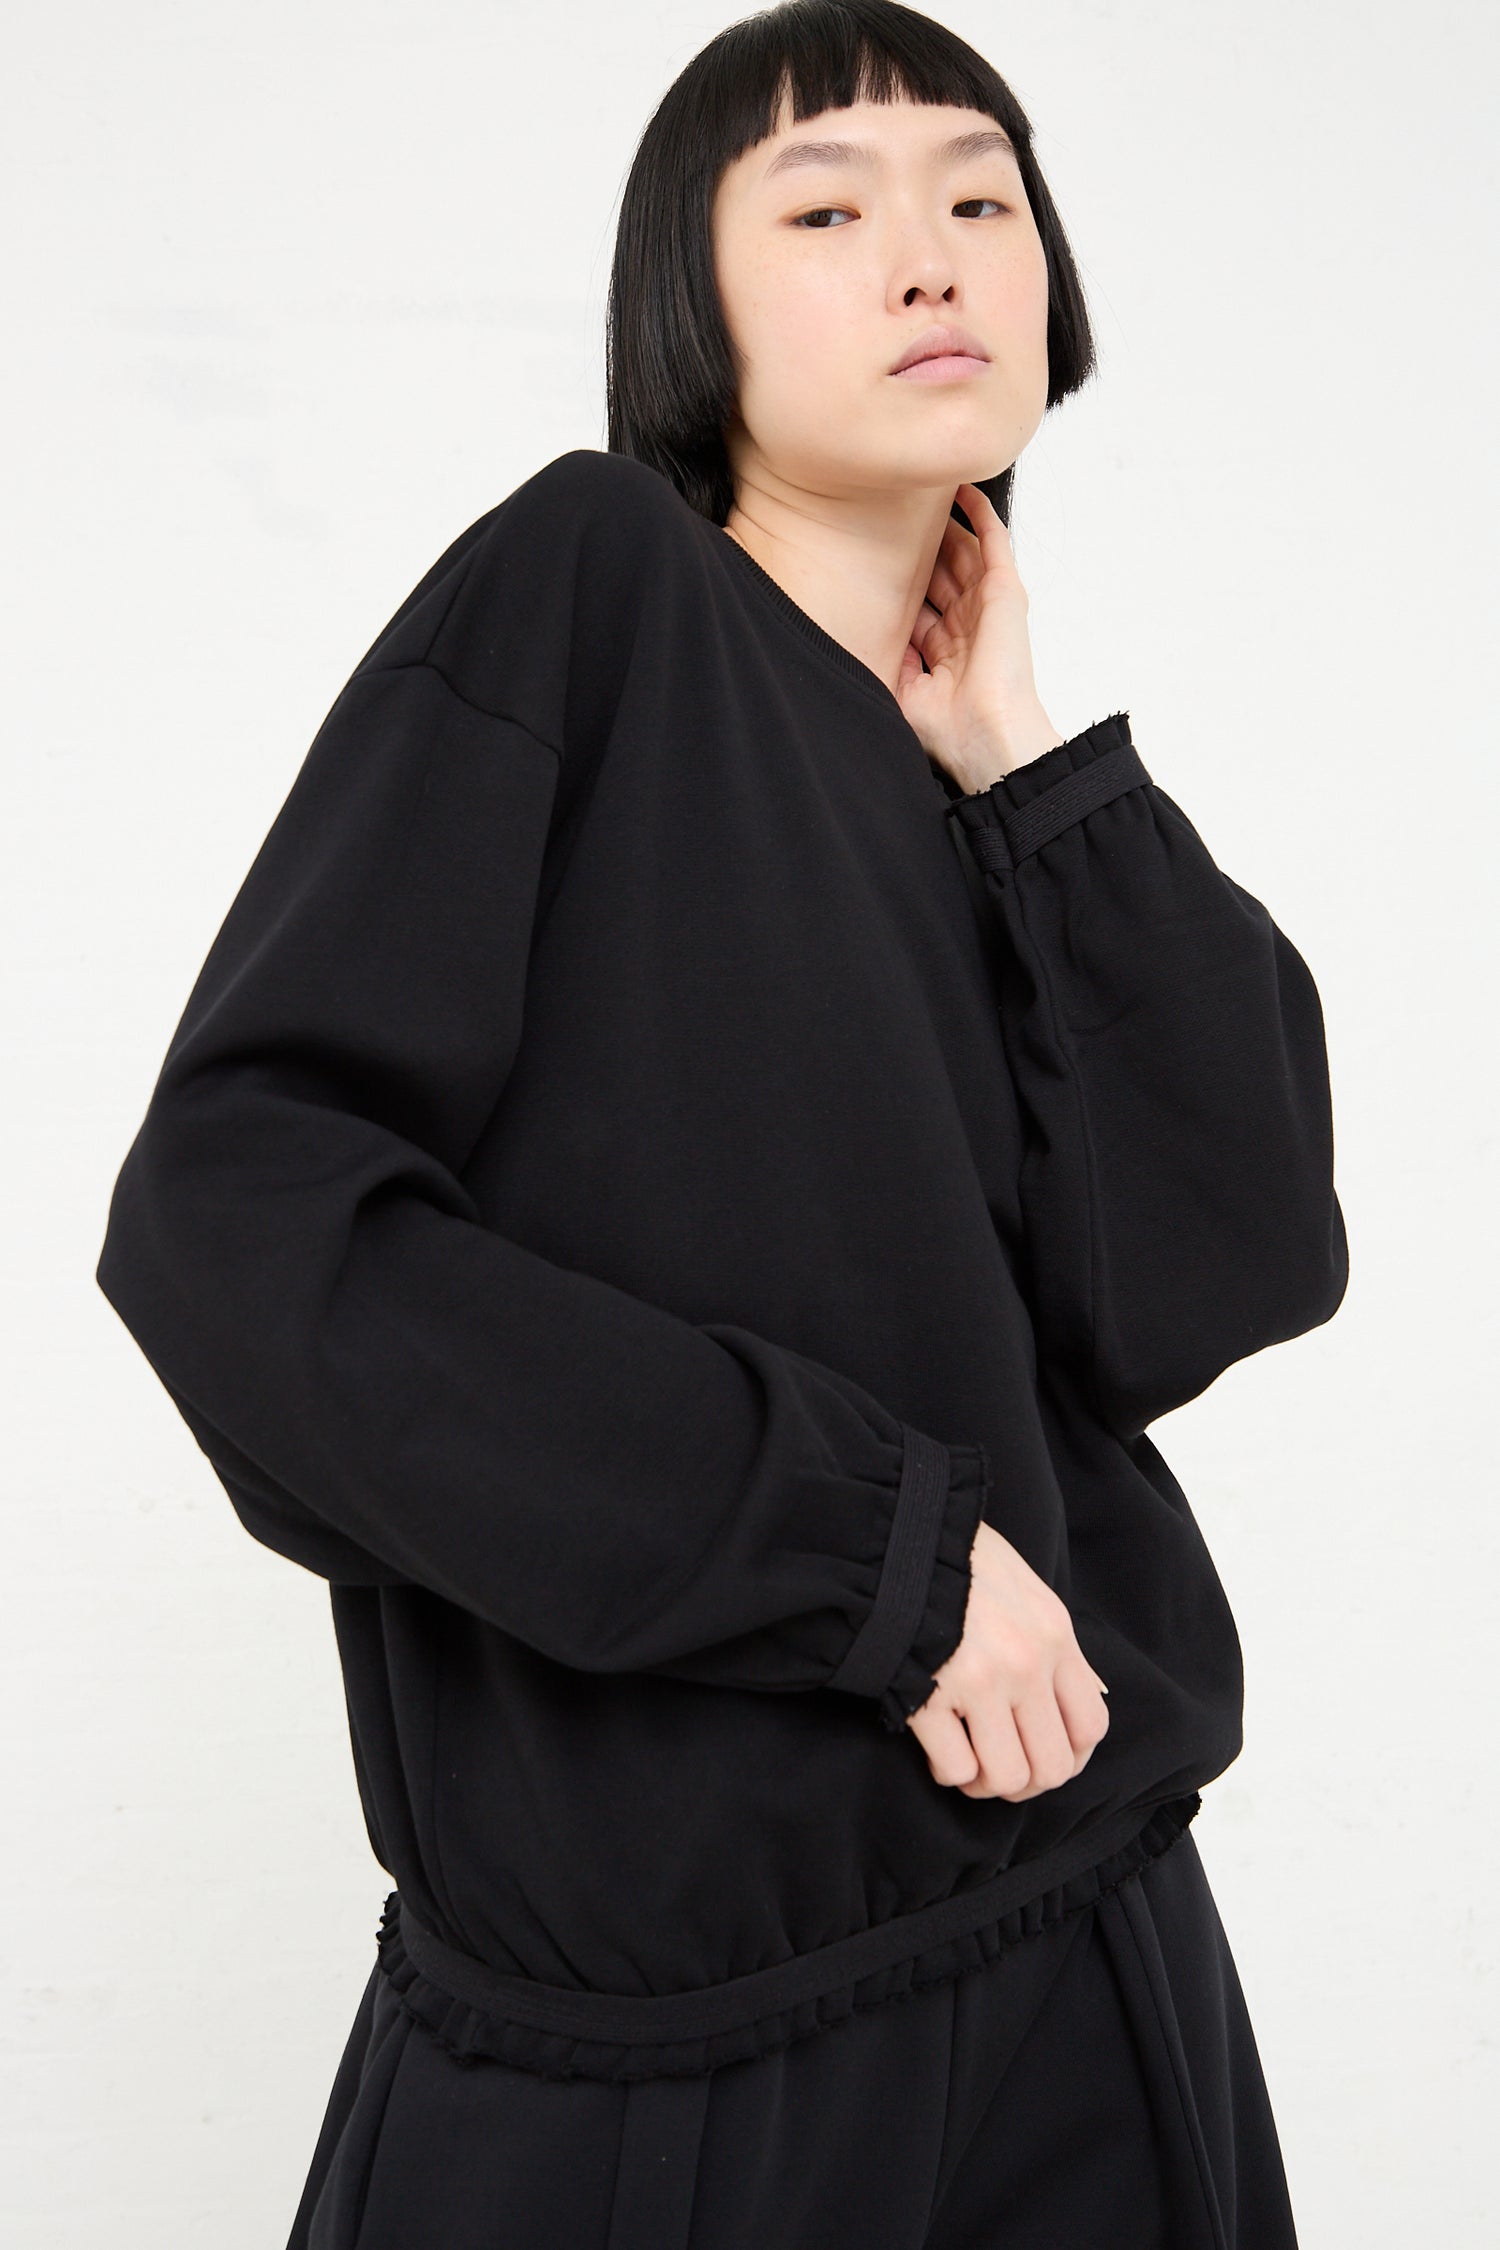 Woman in a Baserange Organic Cotton Route Sweatshirt in Black and pants posing with her hand on her neck, against a white background.